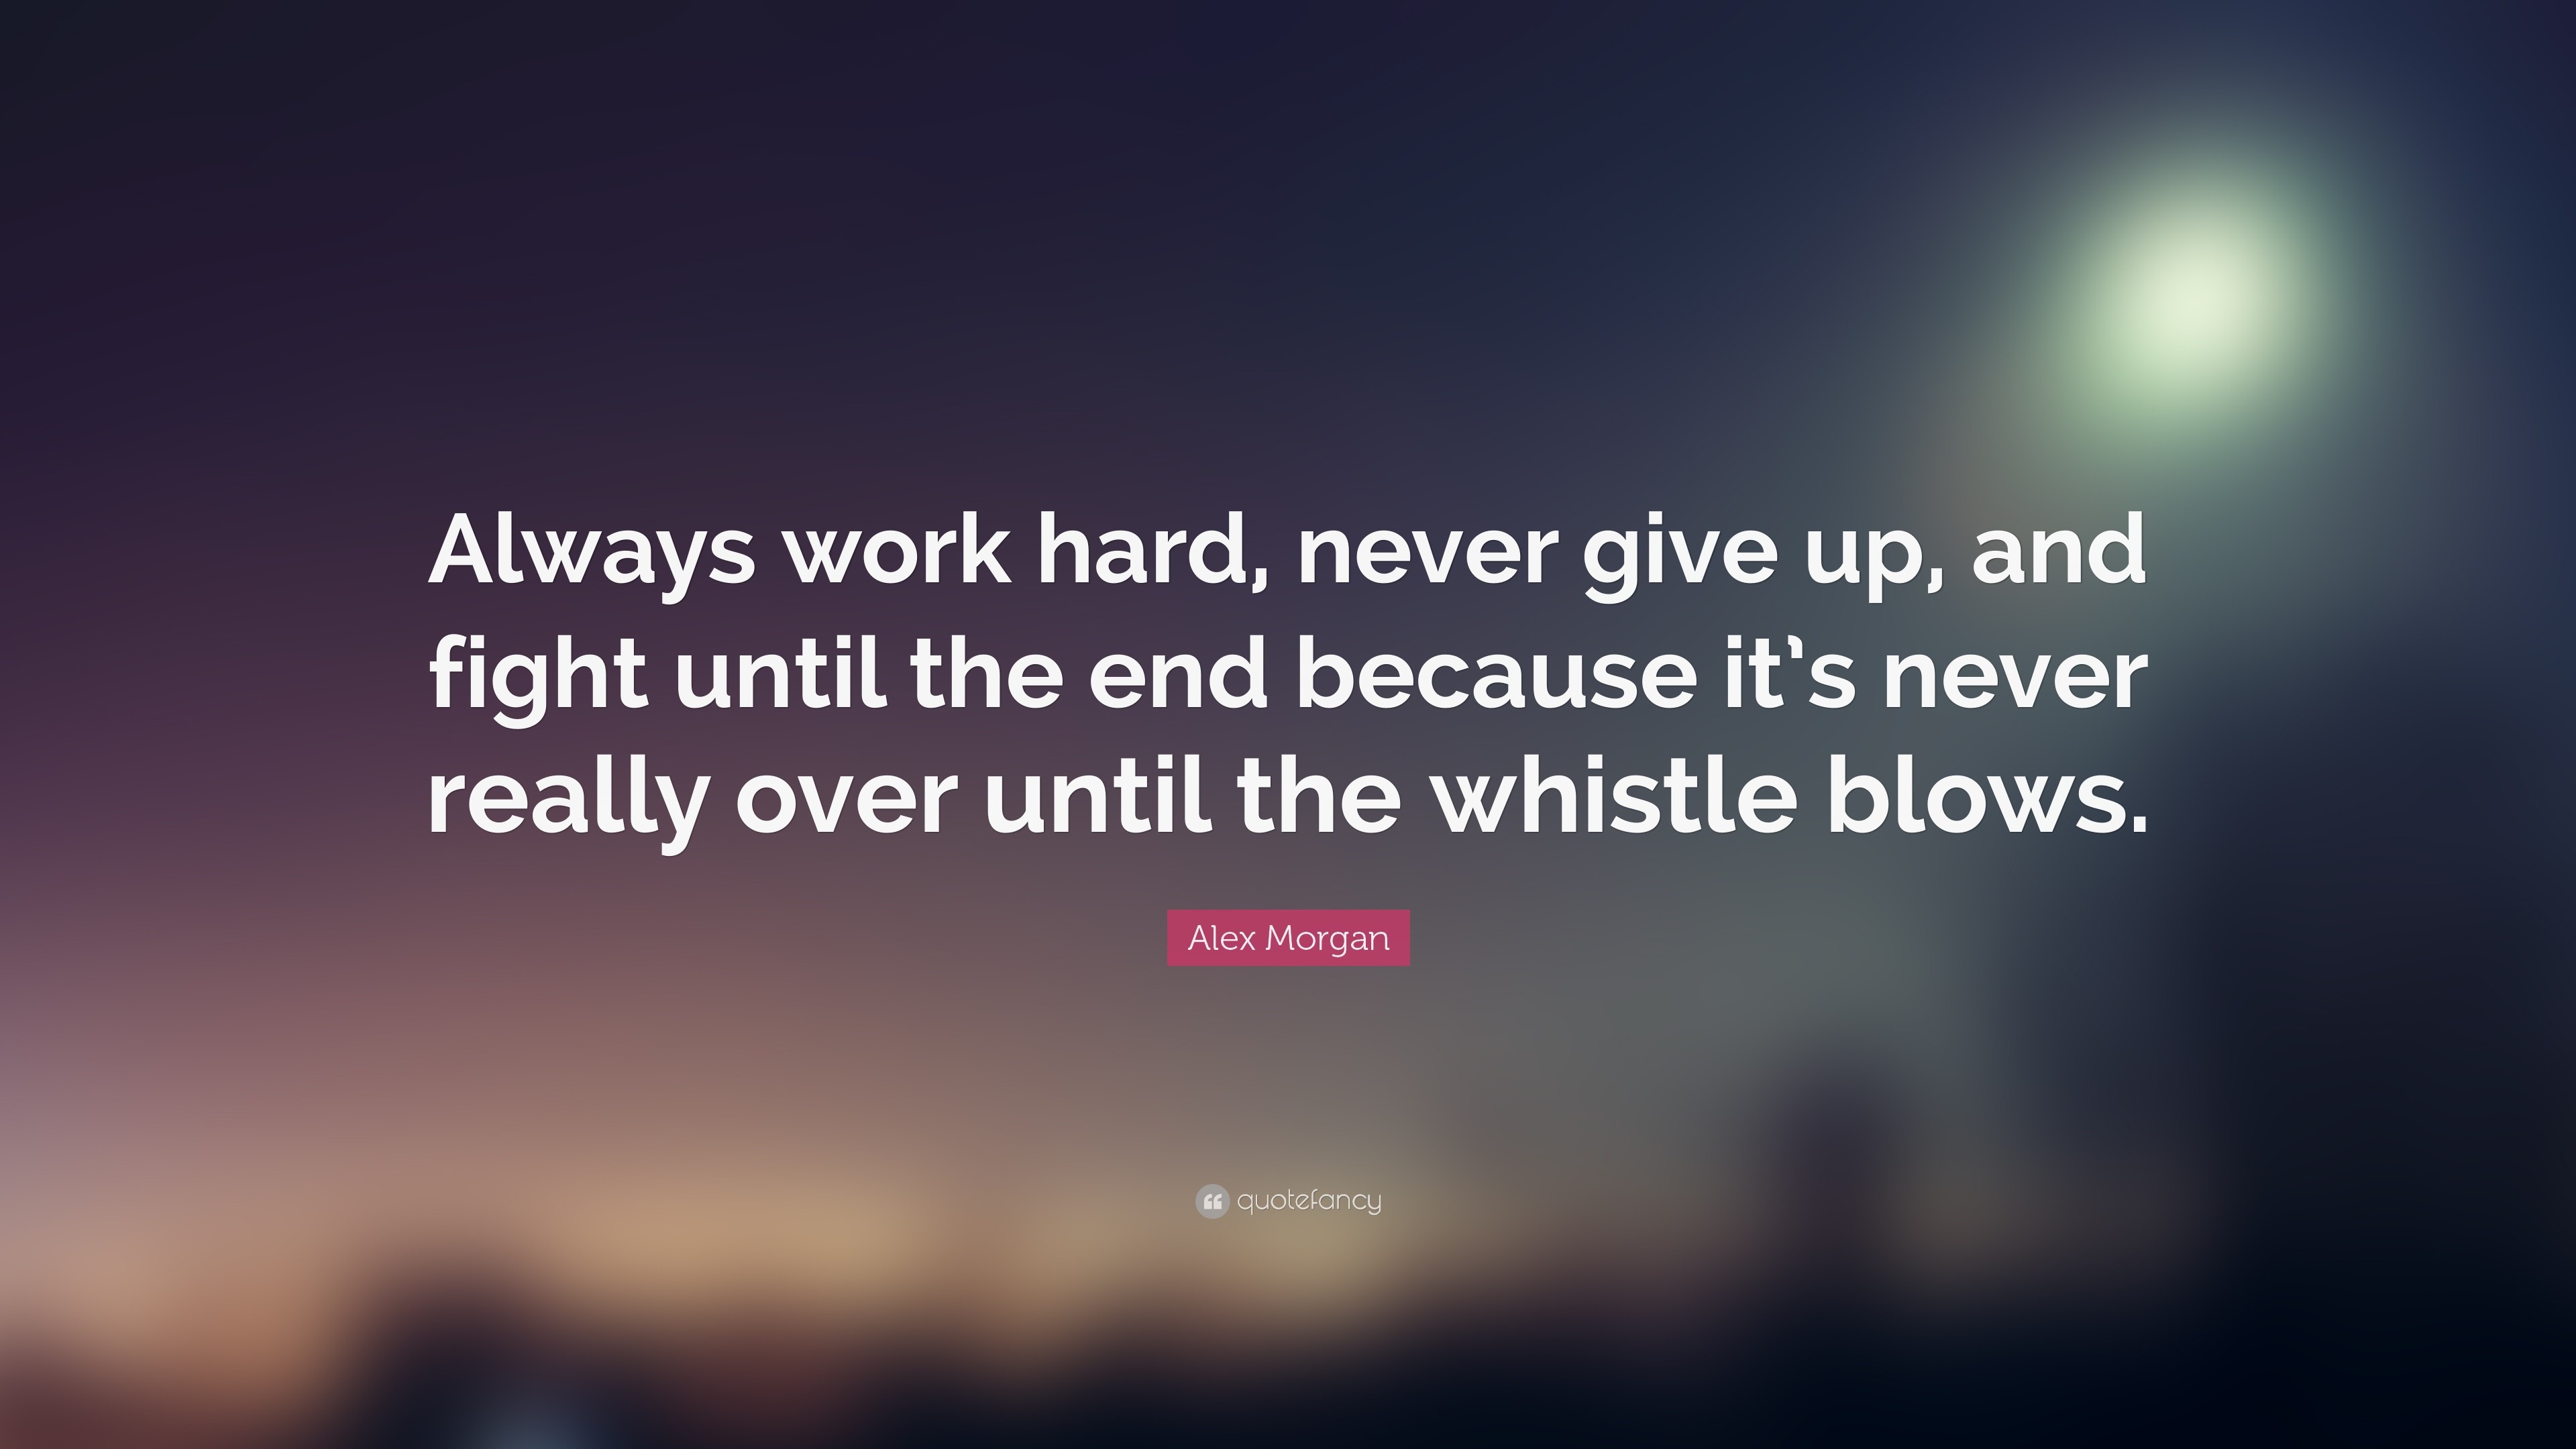 3840x2160 Hard Work Quotes: “Always work hard, never give up, and fight until